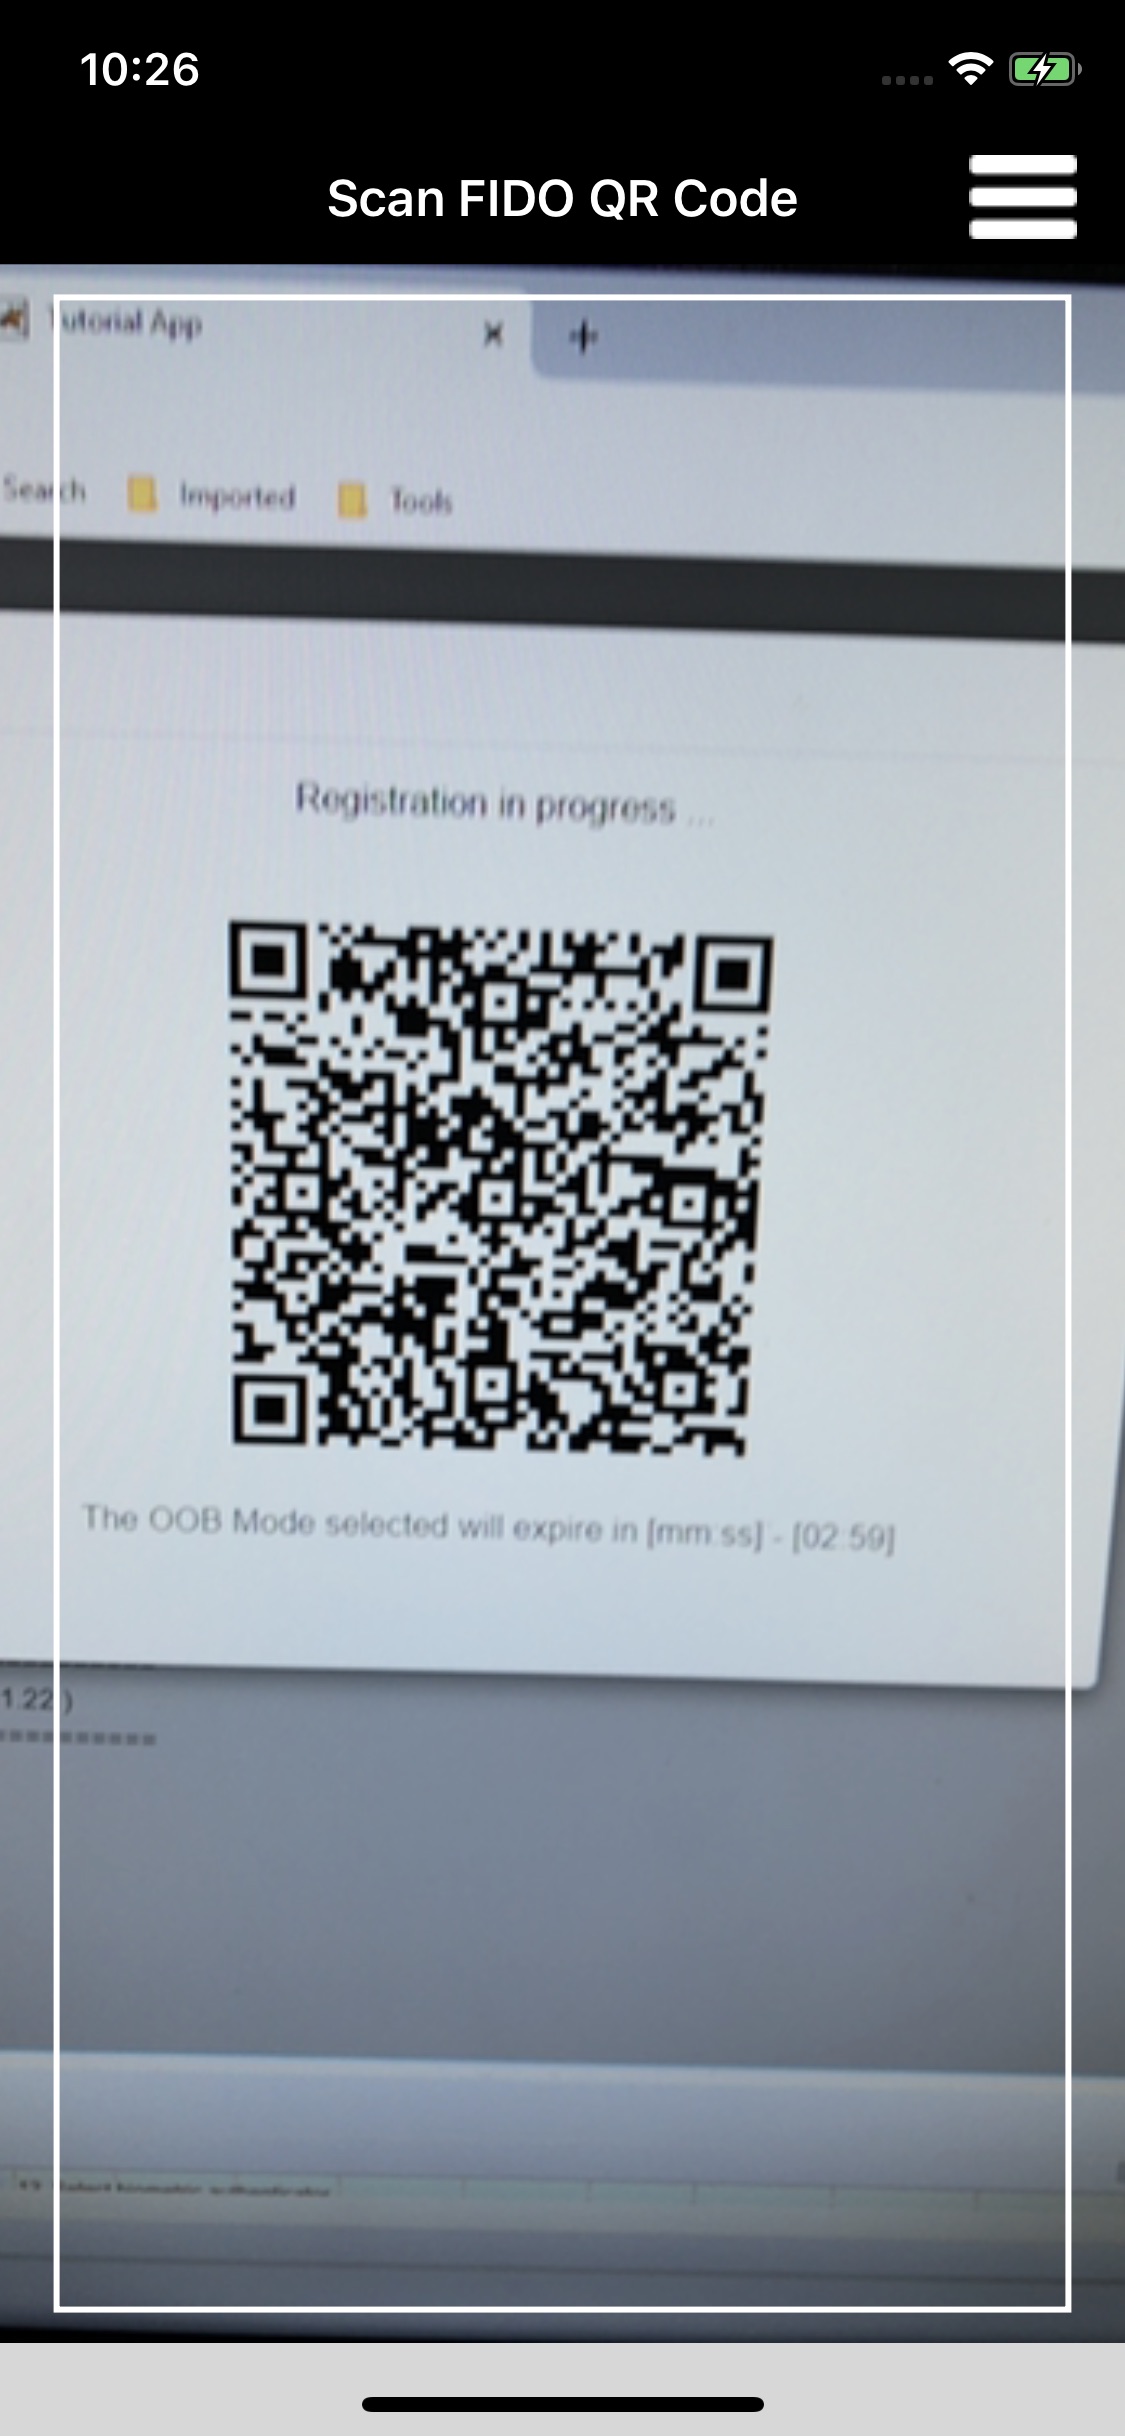 The left side of the figure demonstrates the Passport application on an iPhone device using the device camera to capture the QR code.